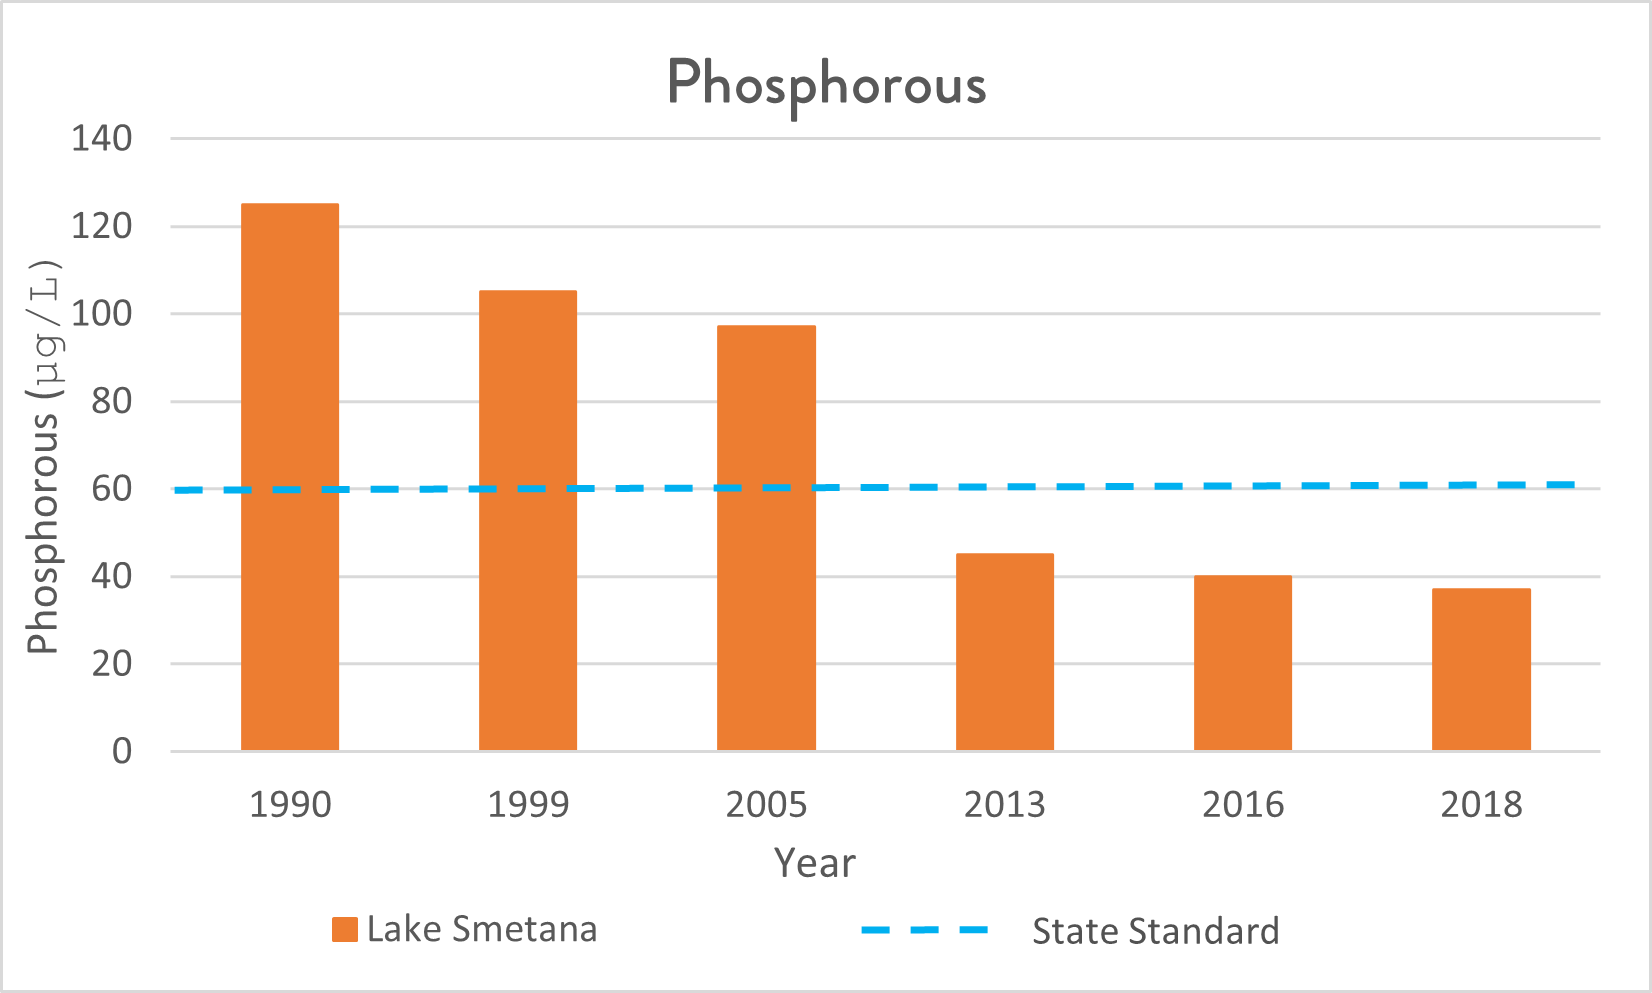 Graph of Phosphorous Levels in Lake Smetana going down since 1990